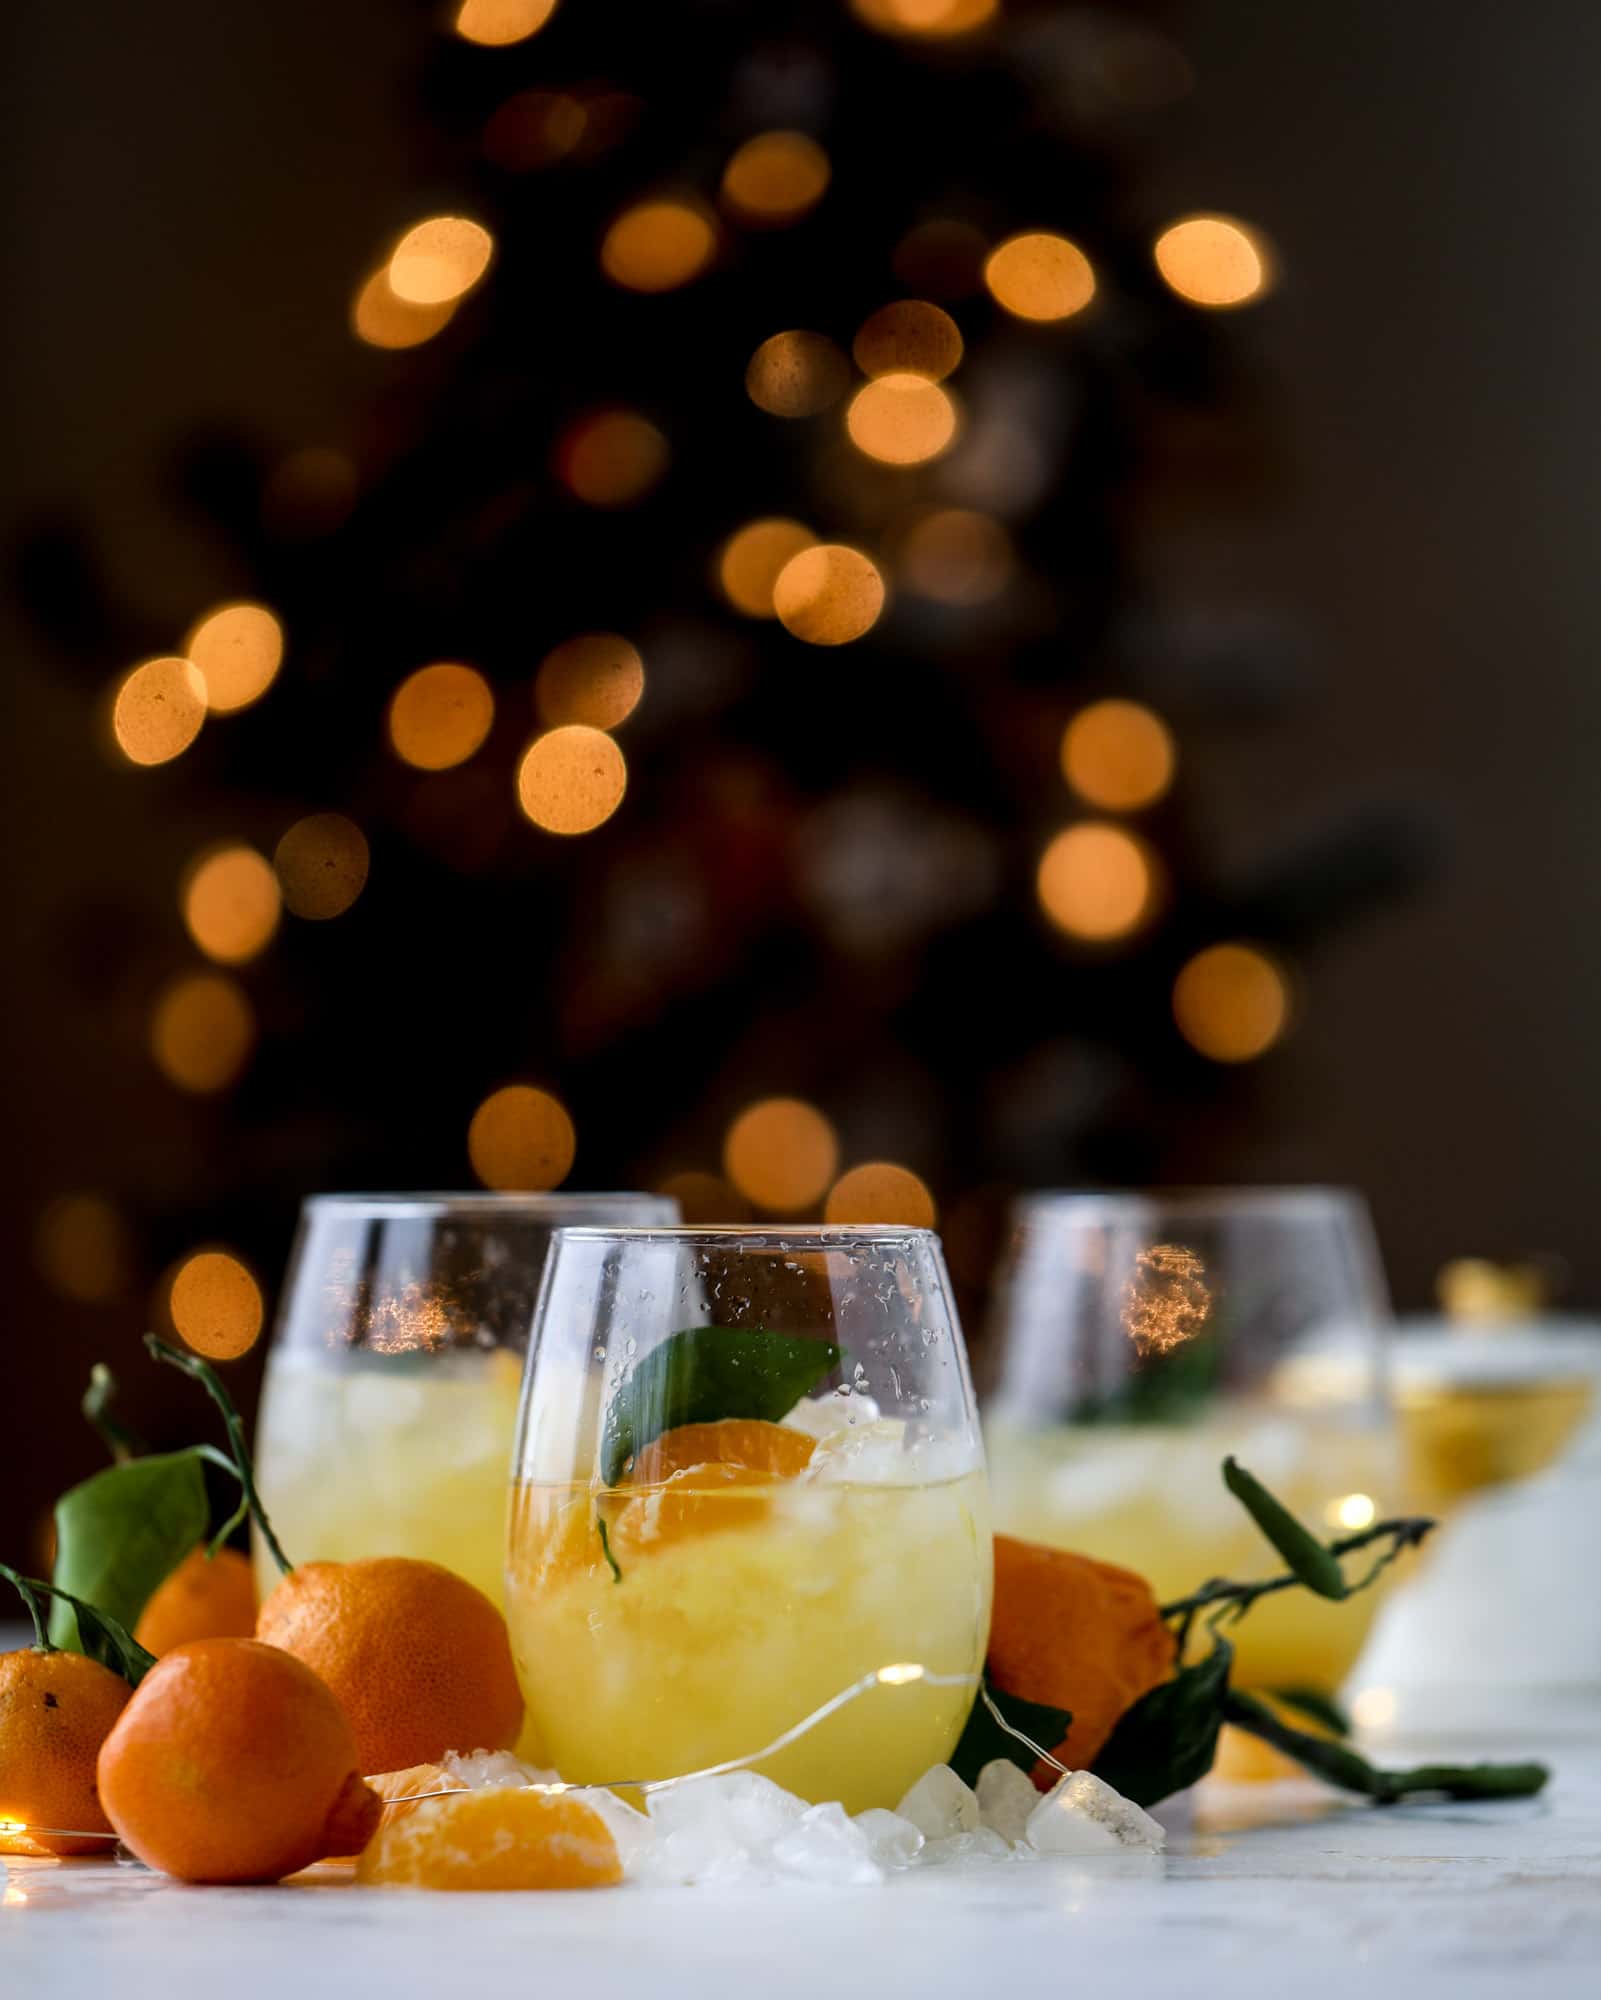 This satsuma cocktail is perfect for the holiday season and winter months when sweet satsumas are in season! This cocktail uses gin or vodka and is topped with champagne and garnished with a few satsuma wedges. Delicious! I howsweeteats.com #satsuma #cocktail